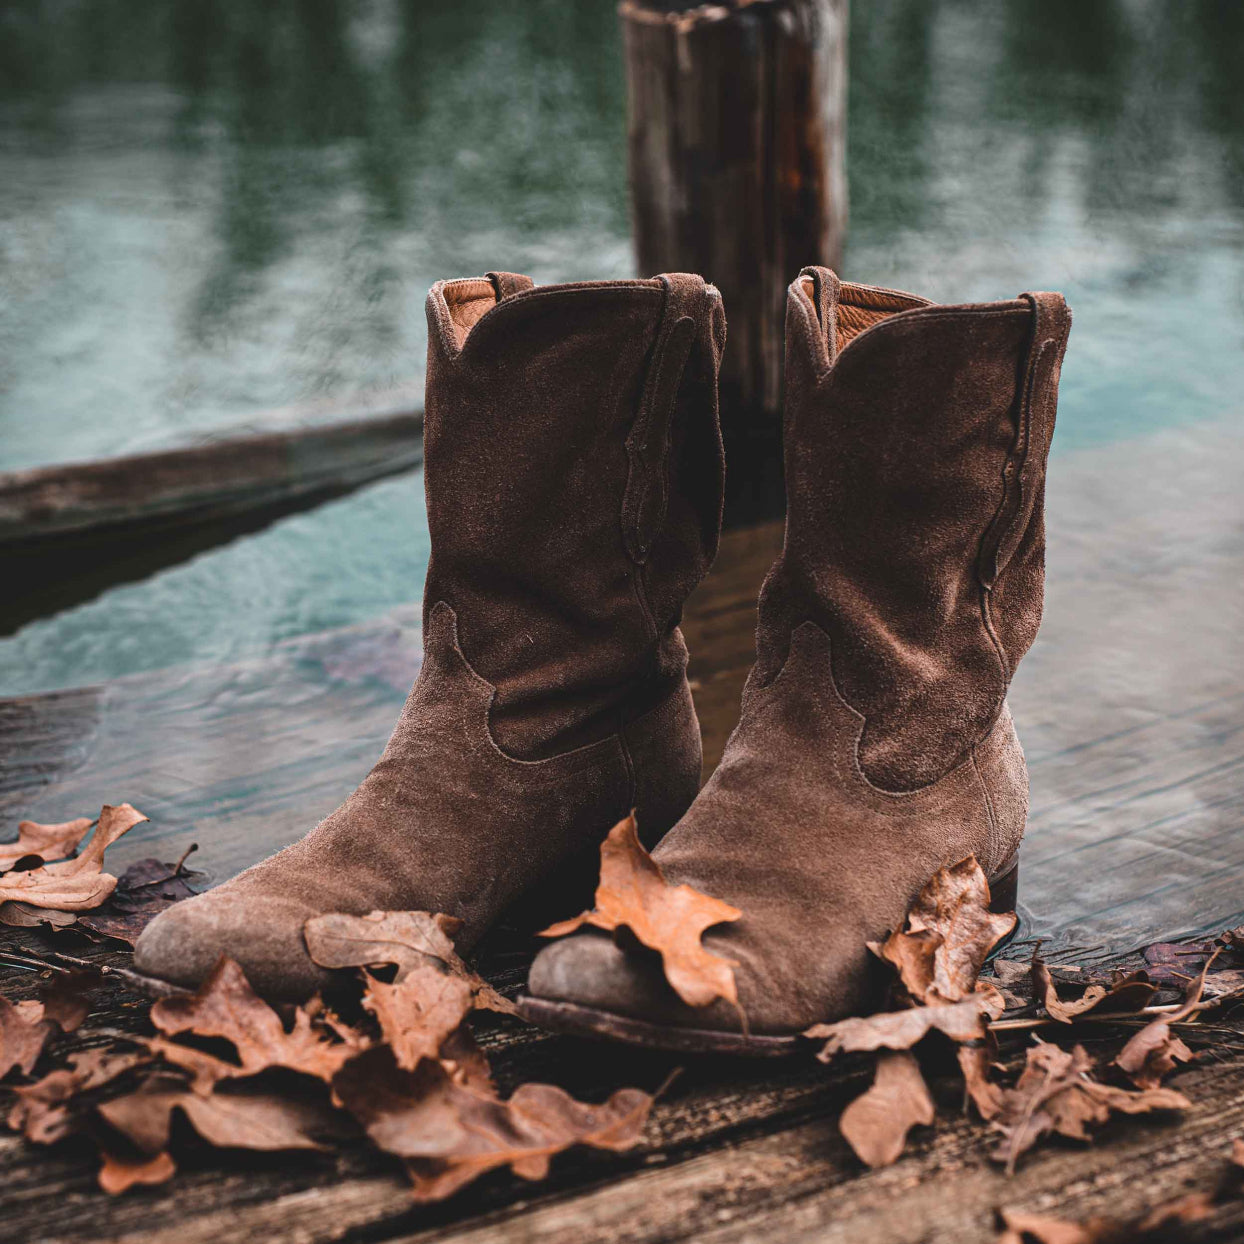 A pair of RUJO Sentry Suede cowboy boots sitting on a dock next to water